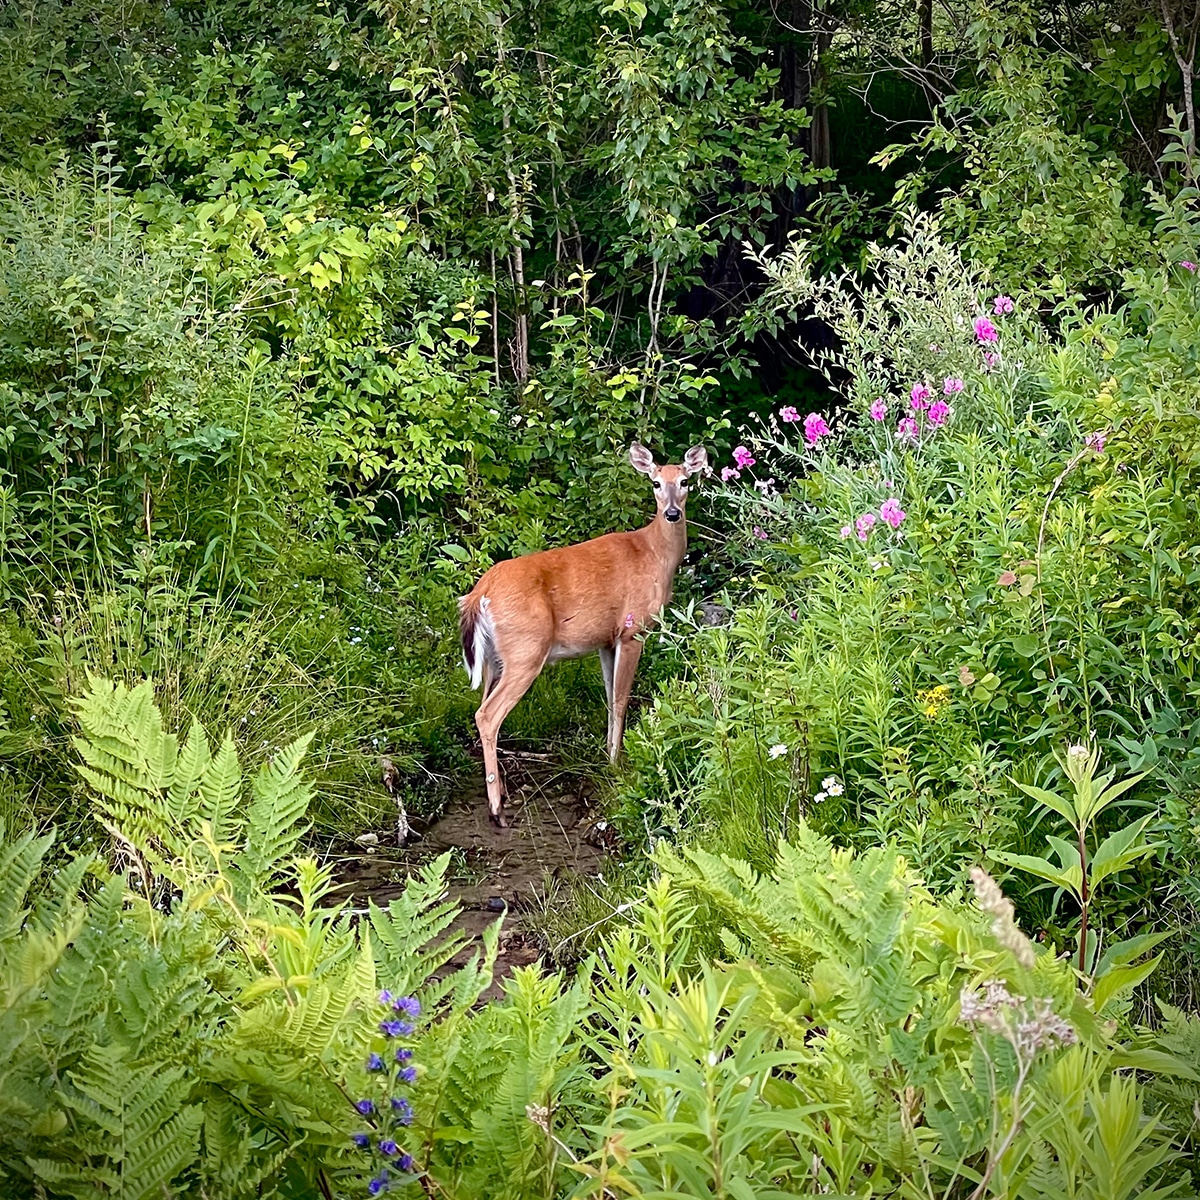 A young deer in a wooded clearing along the Bear River in Petoskey Michigan.